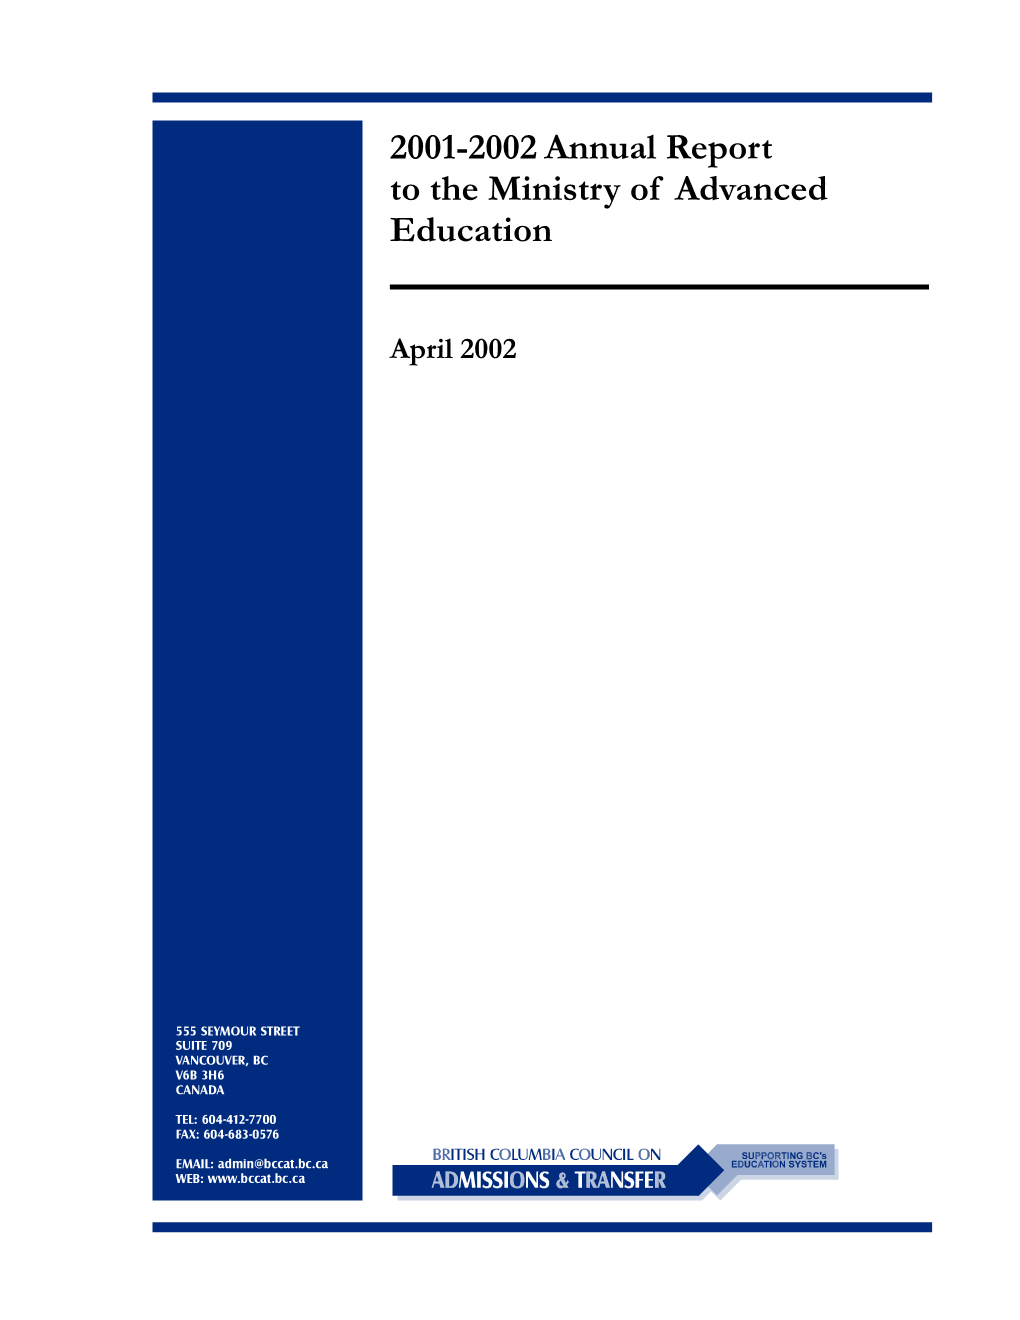 2001-2002 Annual Report to the Ministry of Advanced Education